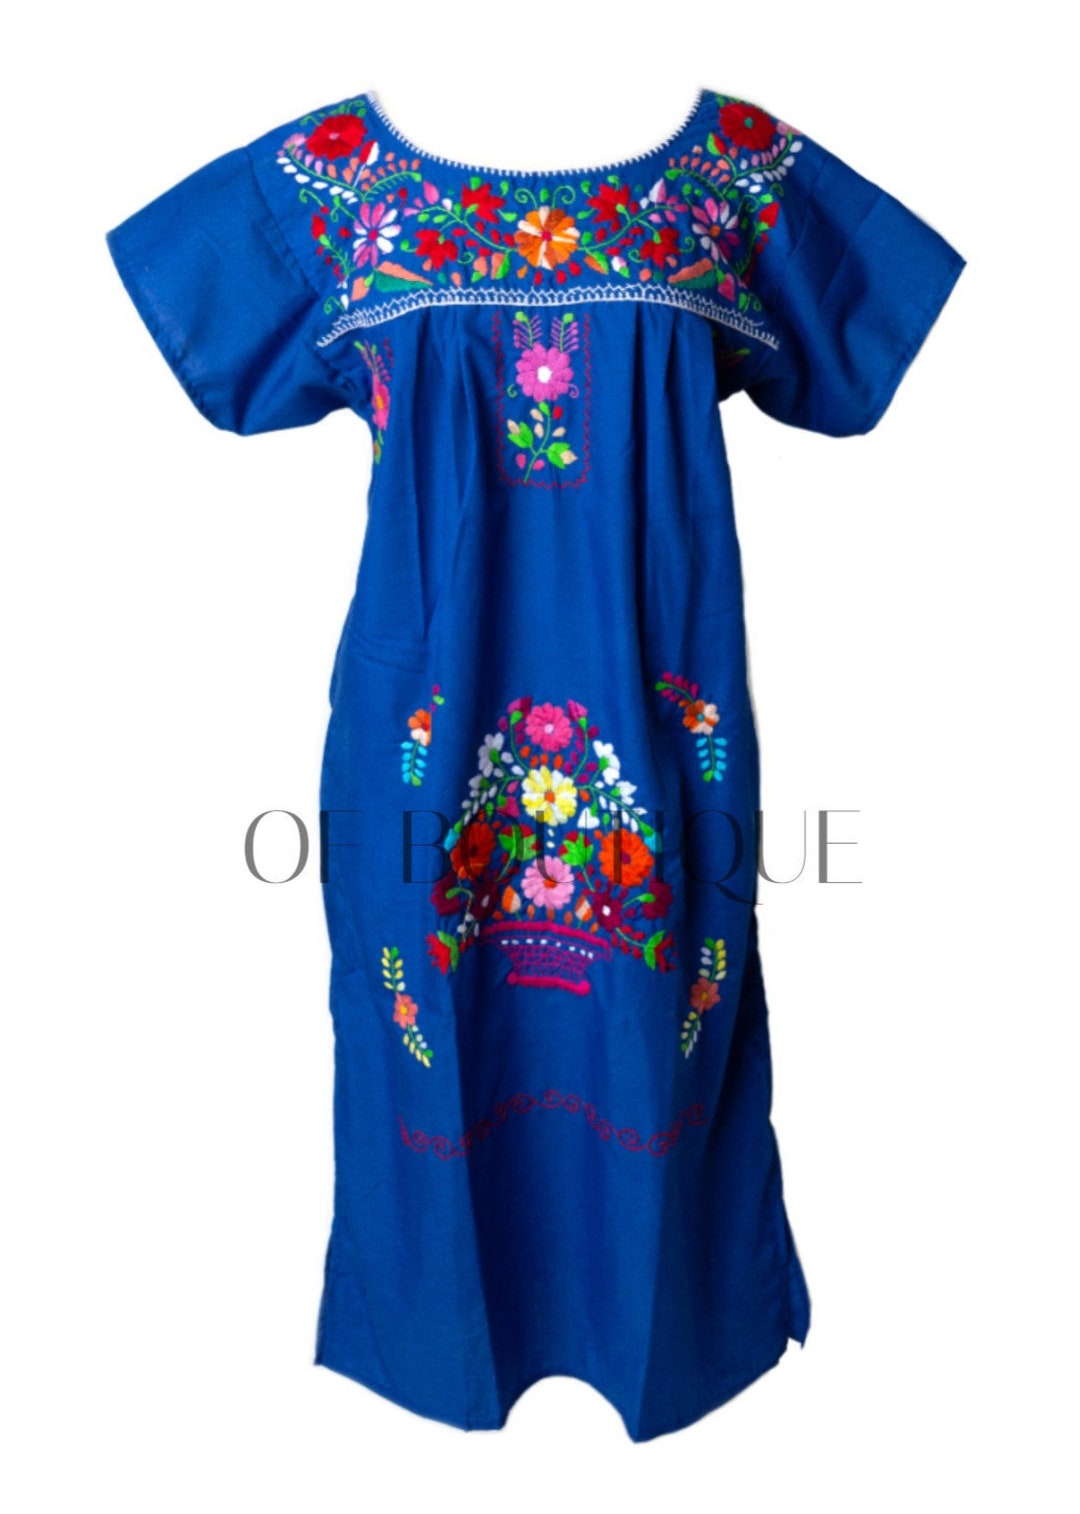 Women's Traditional Mexican Dress Embroidered FIESTA Style ROYAL BLUE ...